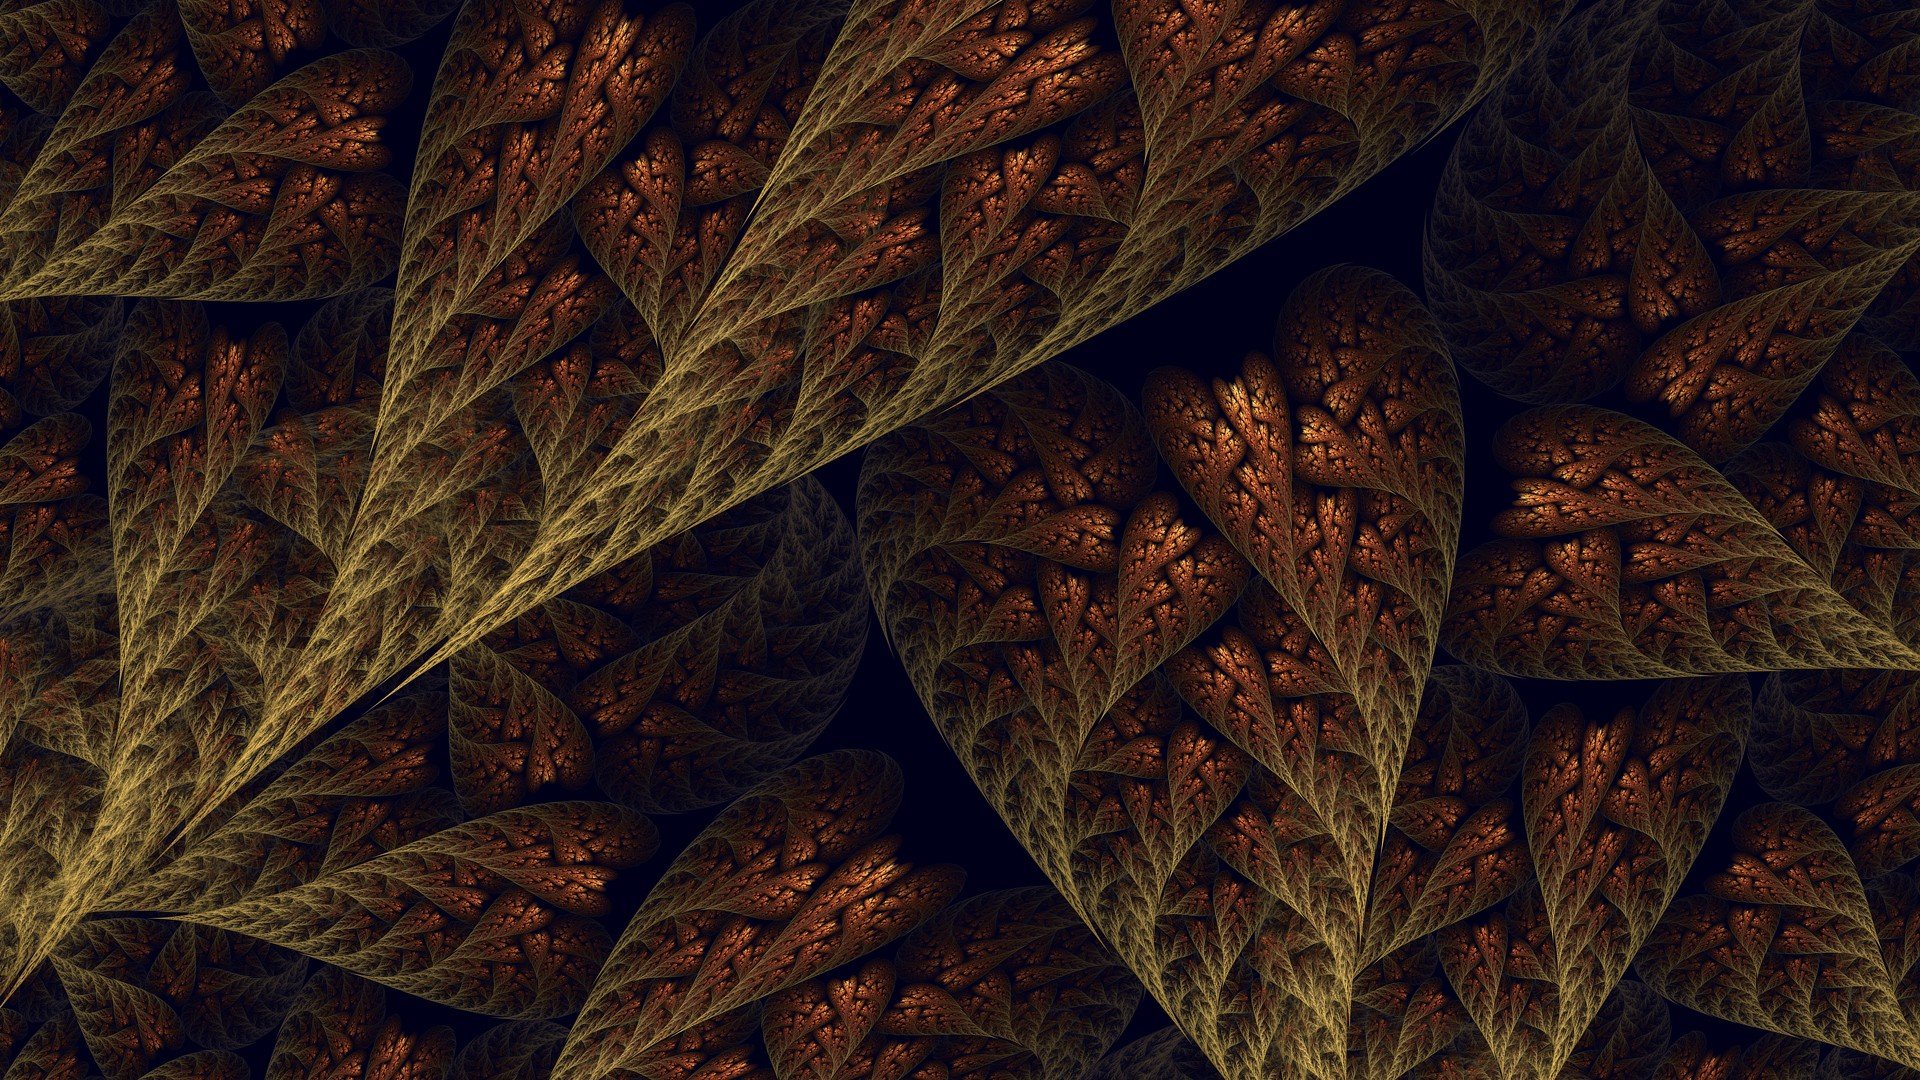 Abstract Leaves Fractals Brown Digital Art Wallpaper Background